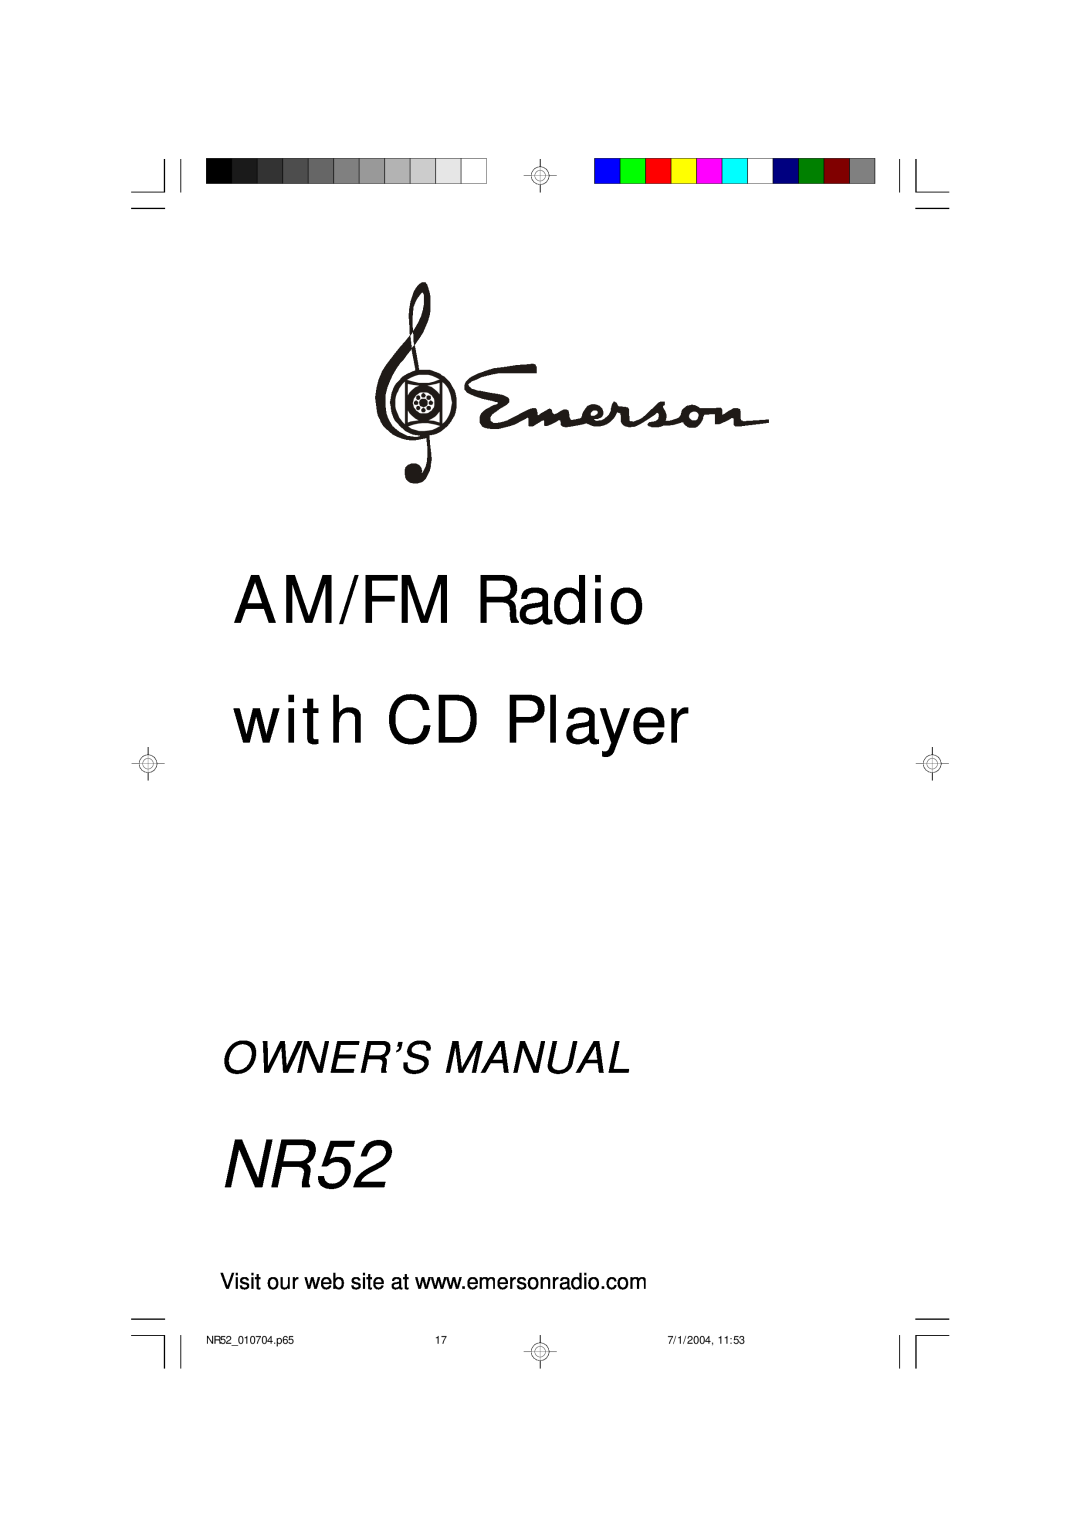 Emerson owner manual AM/FM Radio with CD Player, NR52 010704.p65, 7/1/2004, 11 